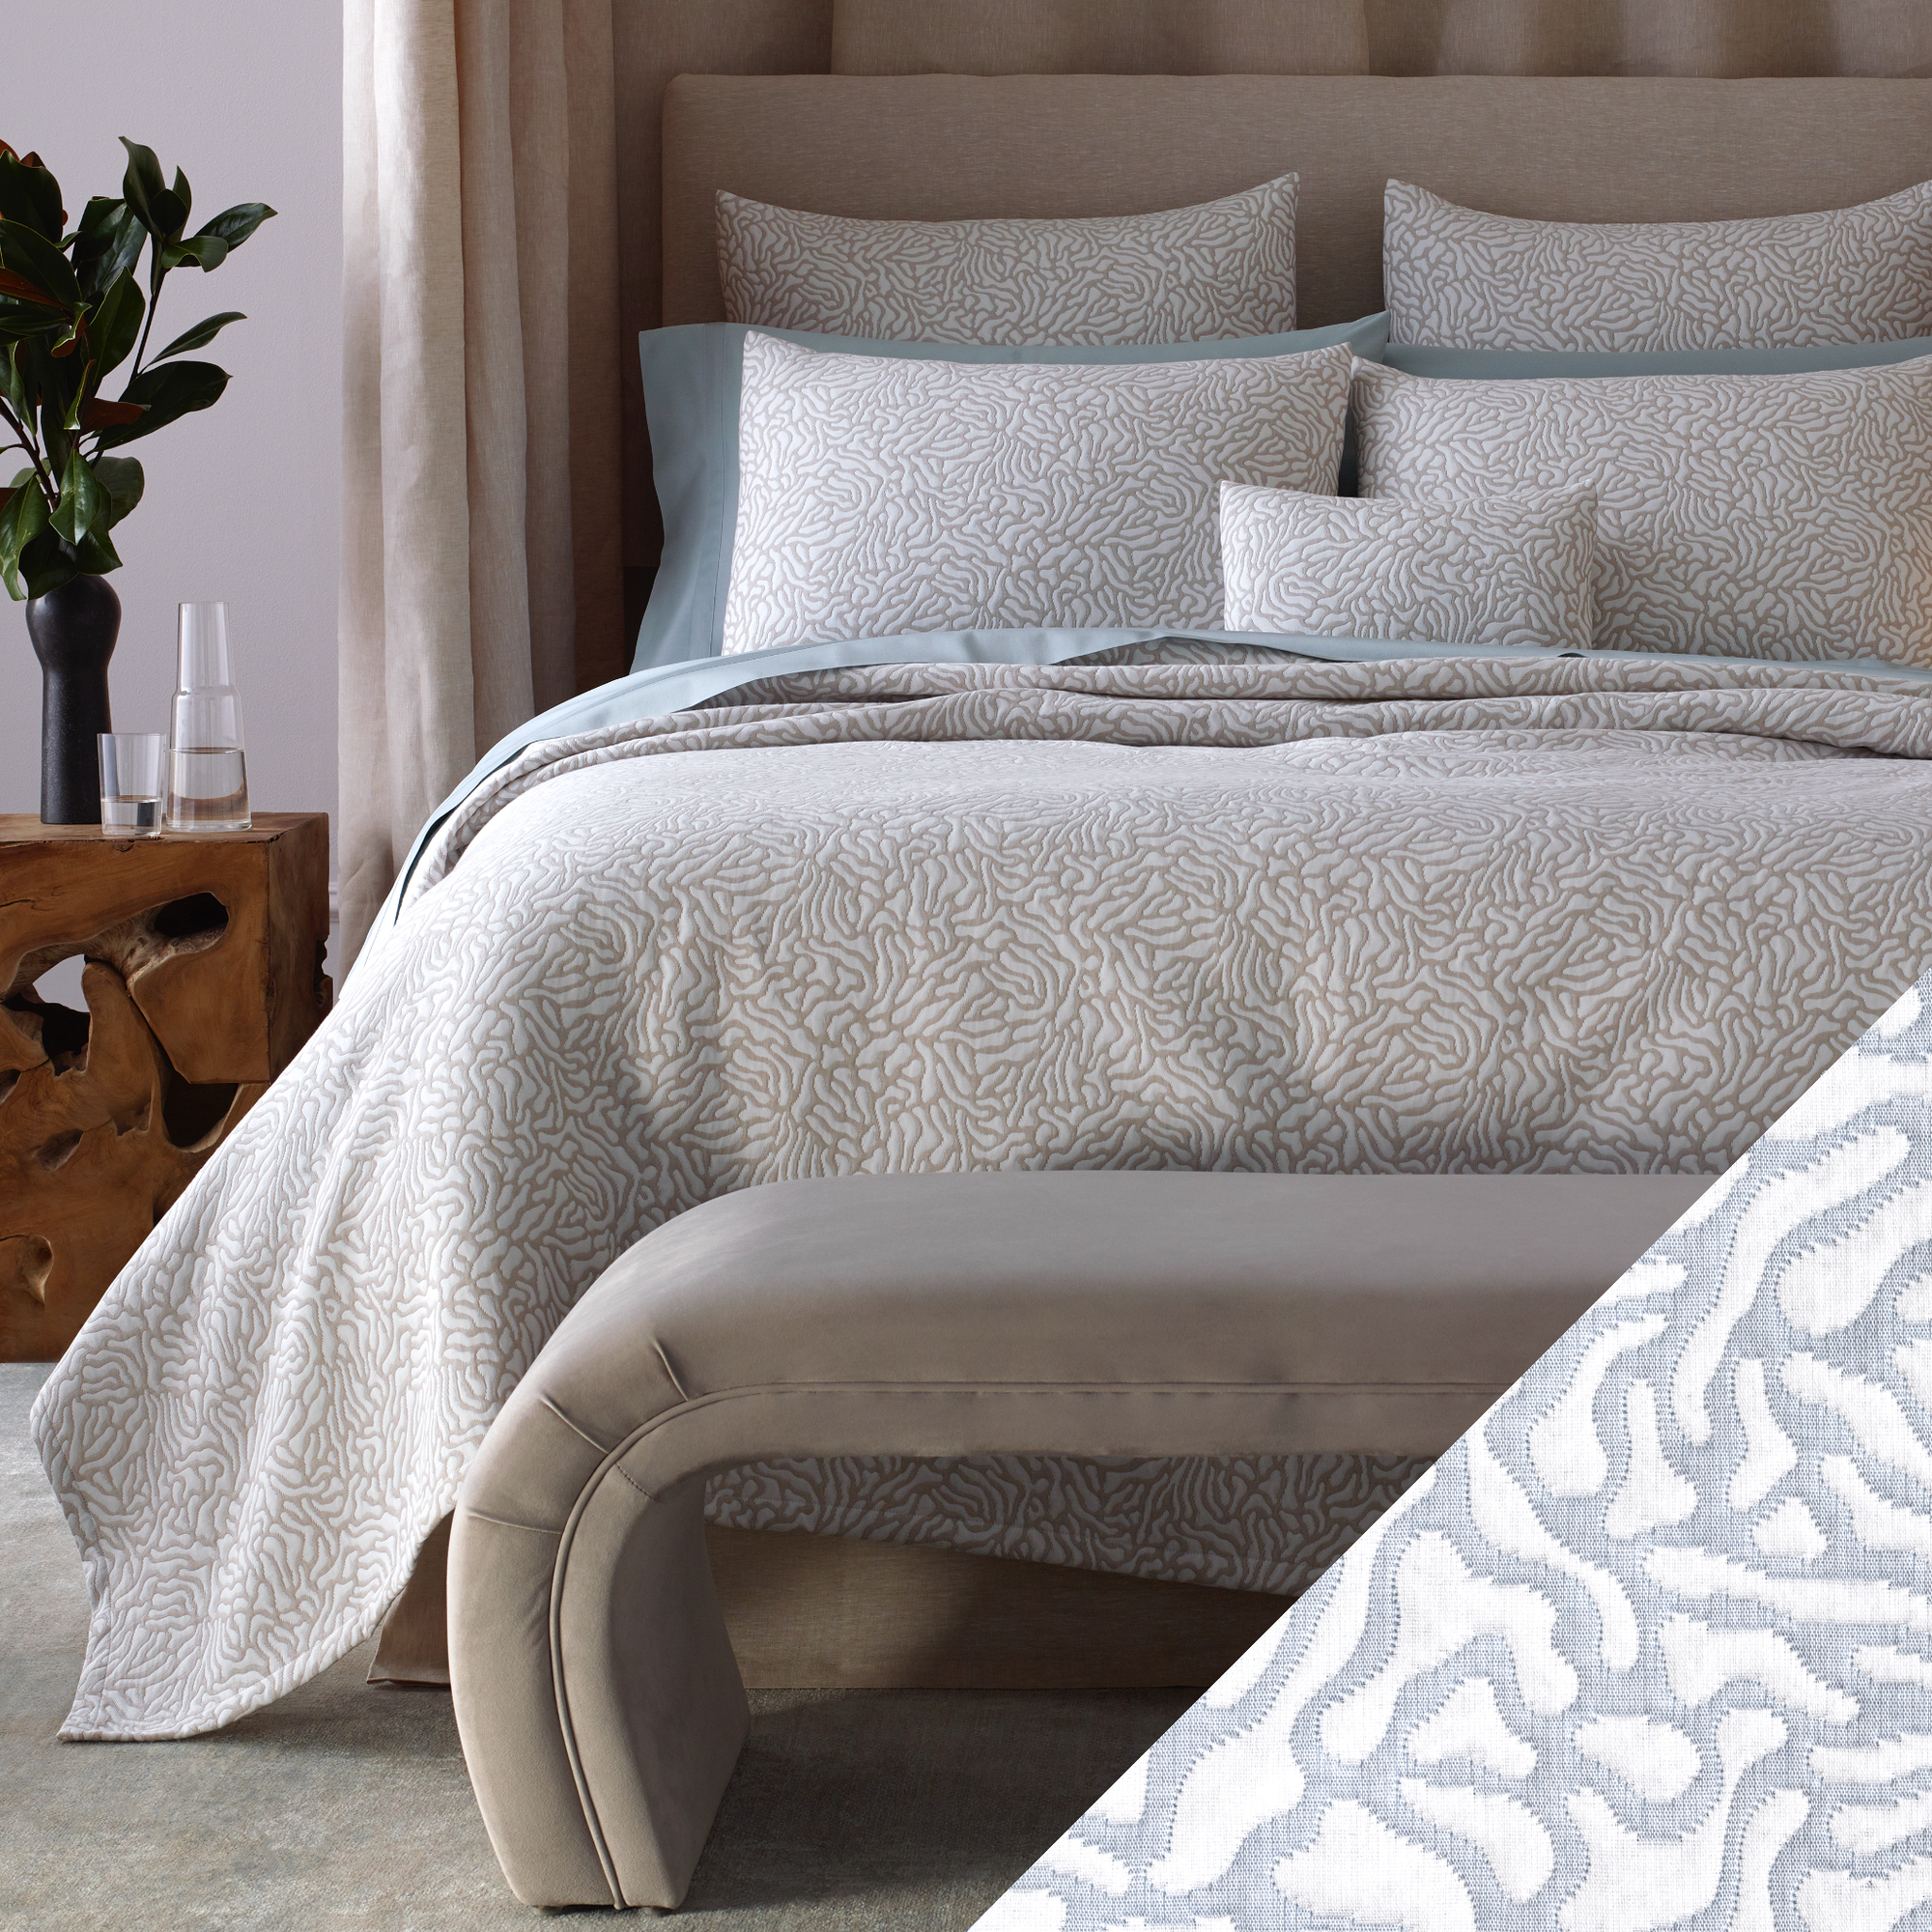 Full Bed Dressed in Matouk Schumacher Cora Bedding in Natural White Color with Blue White Swatch